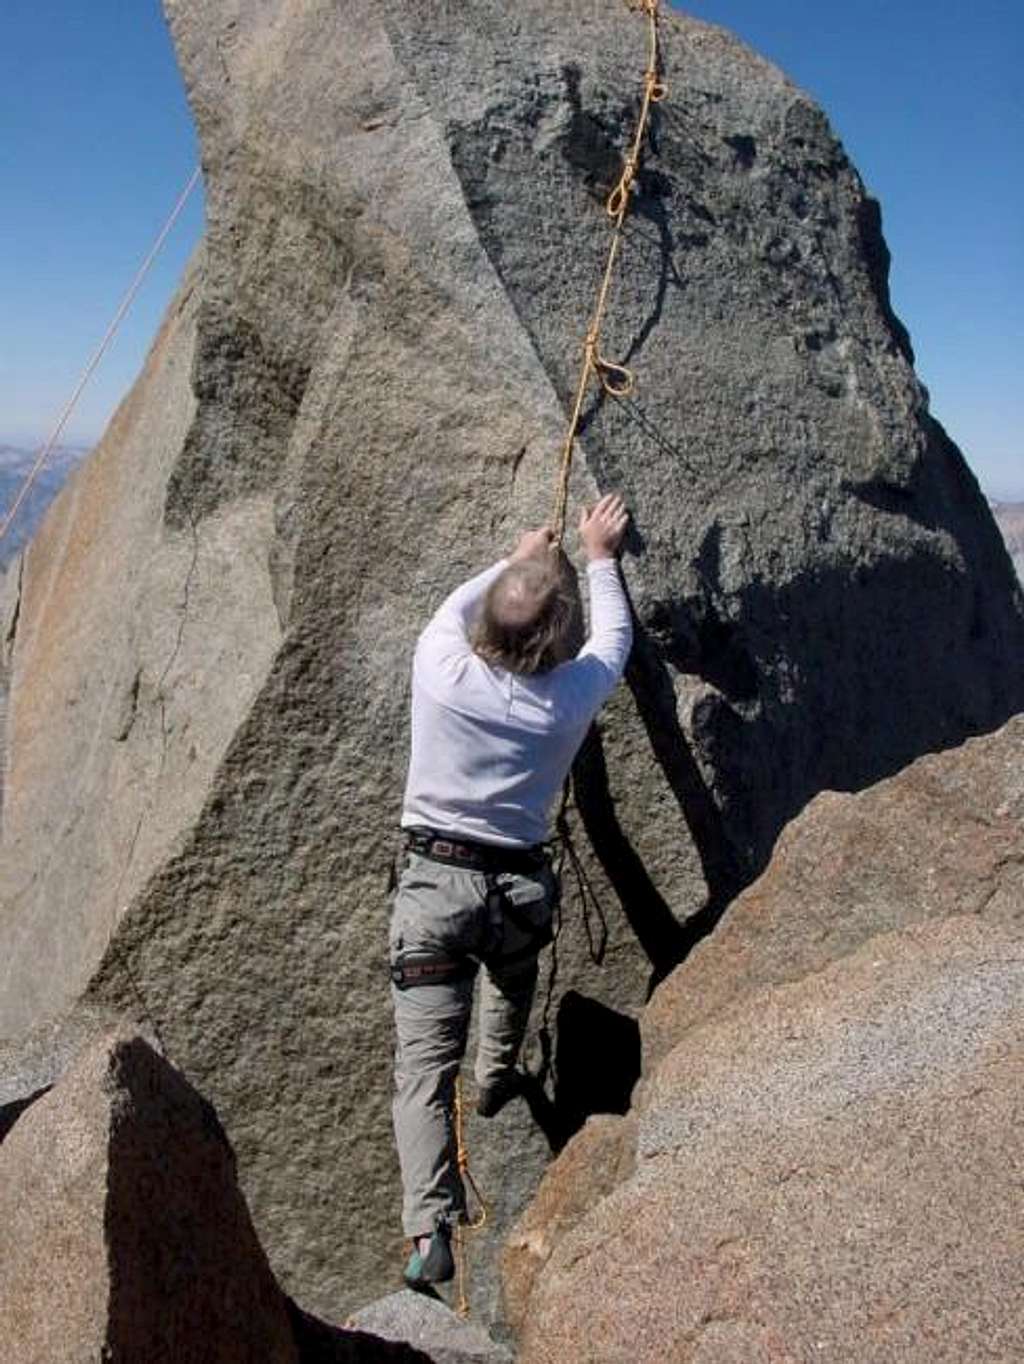 The climber uses loops in the...